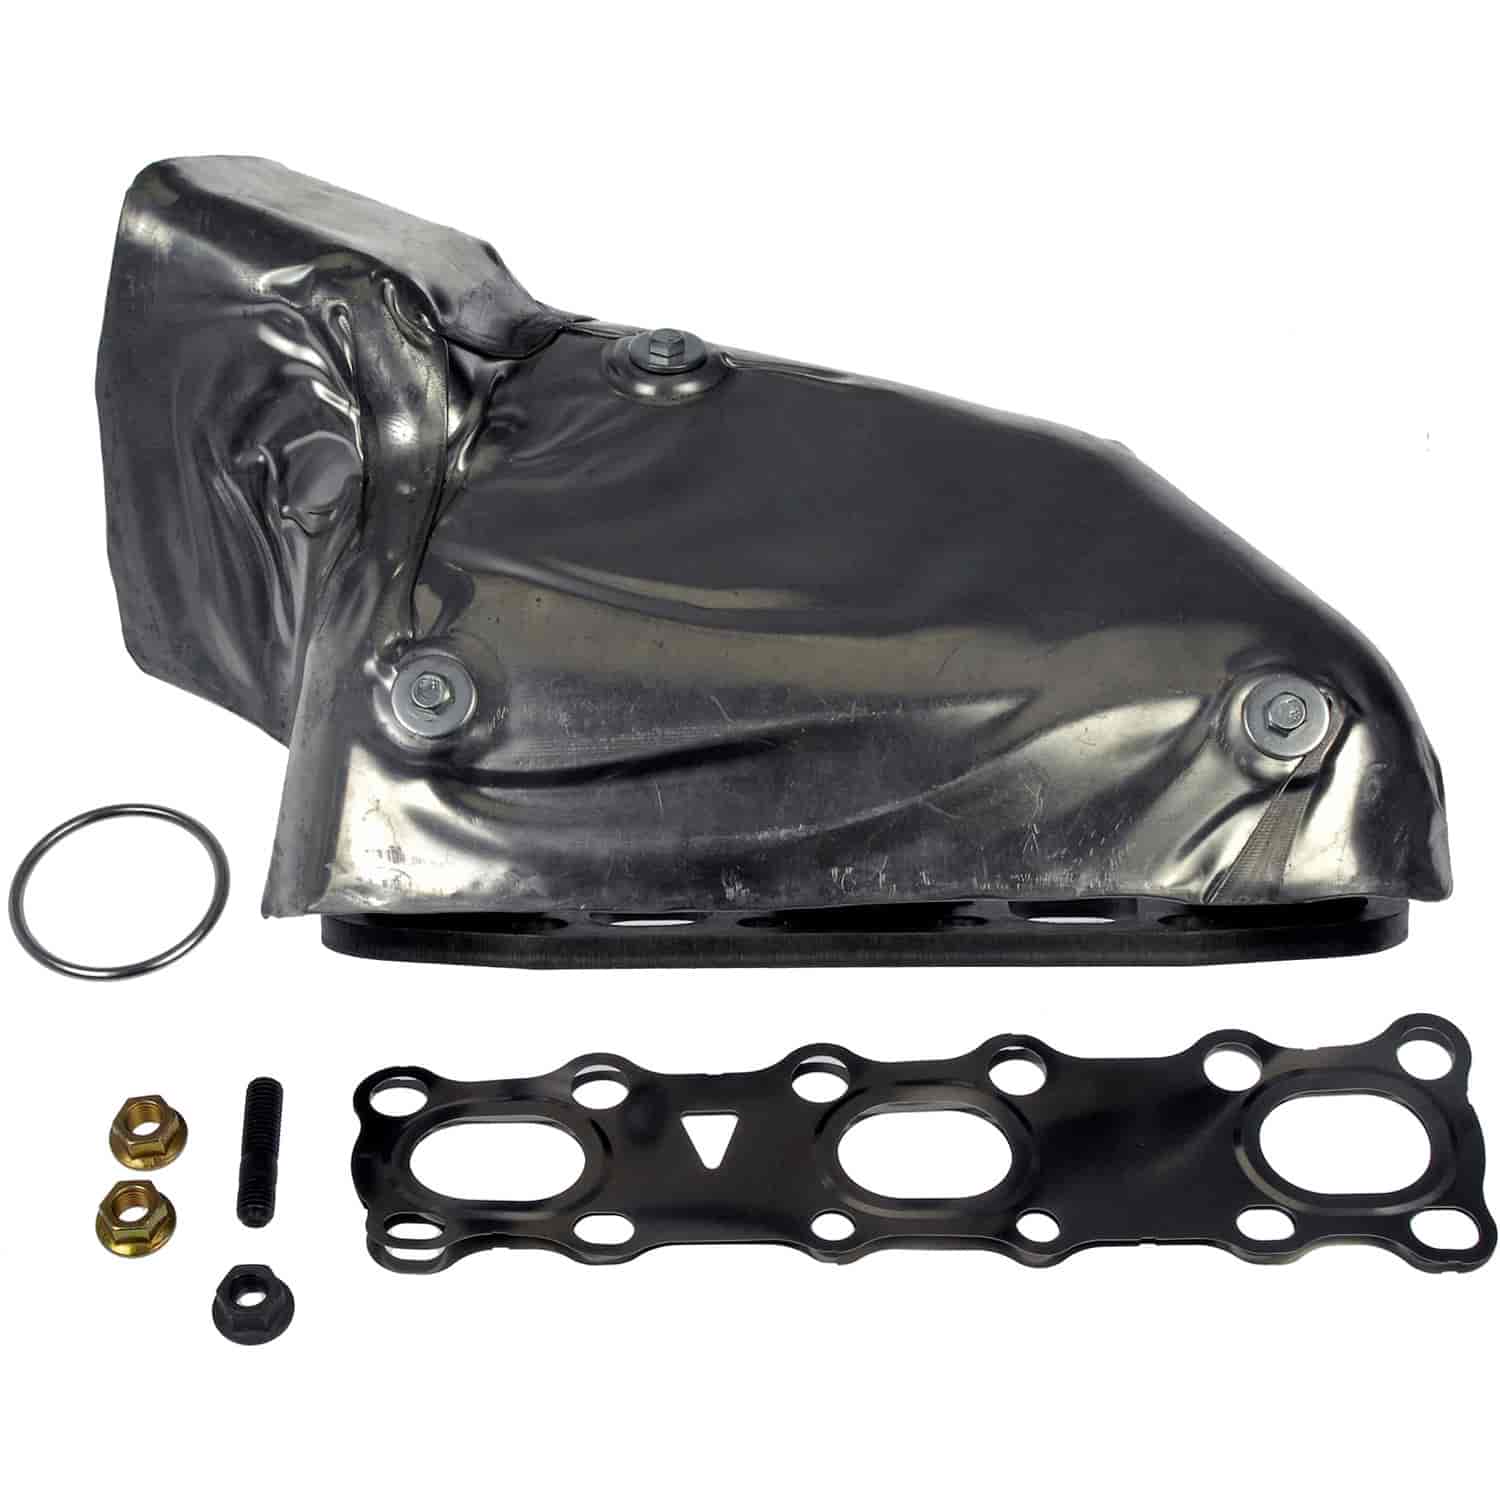 Exhaust Manifold Kit - Includes Gaskets And Required Hardware